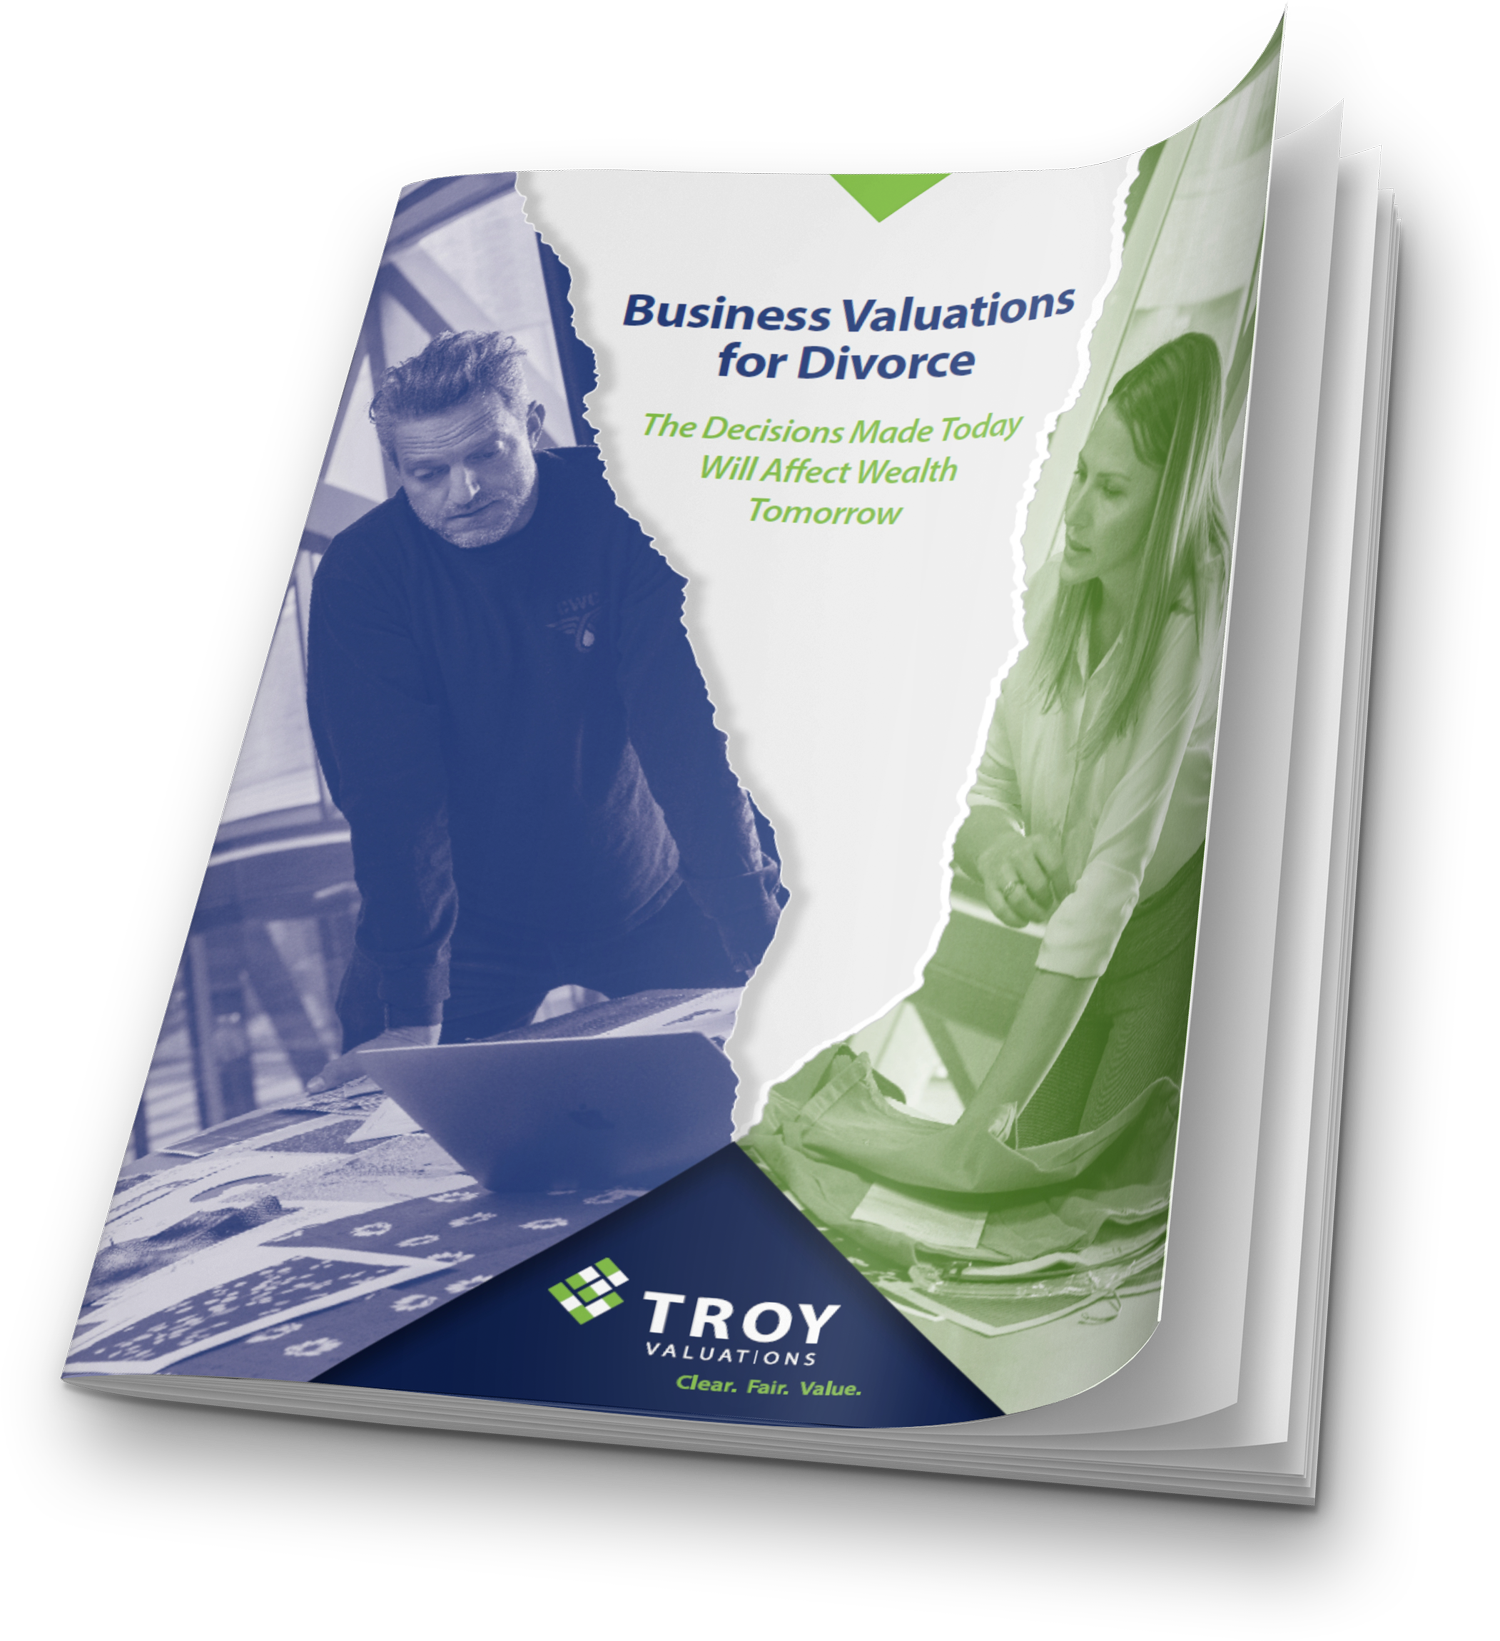 Guide to Business Valuations For Divorce